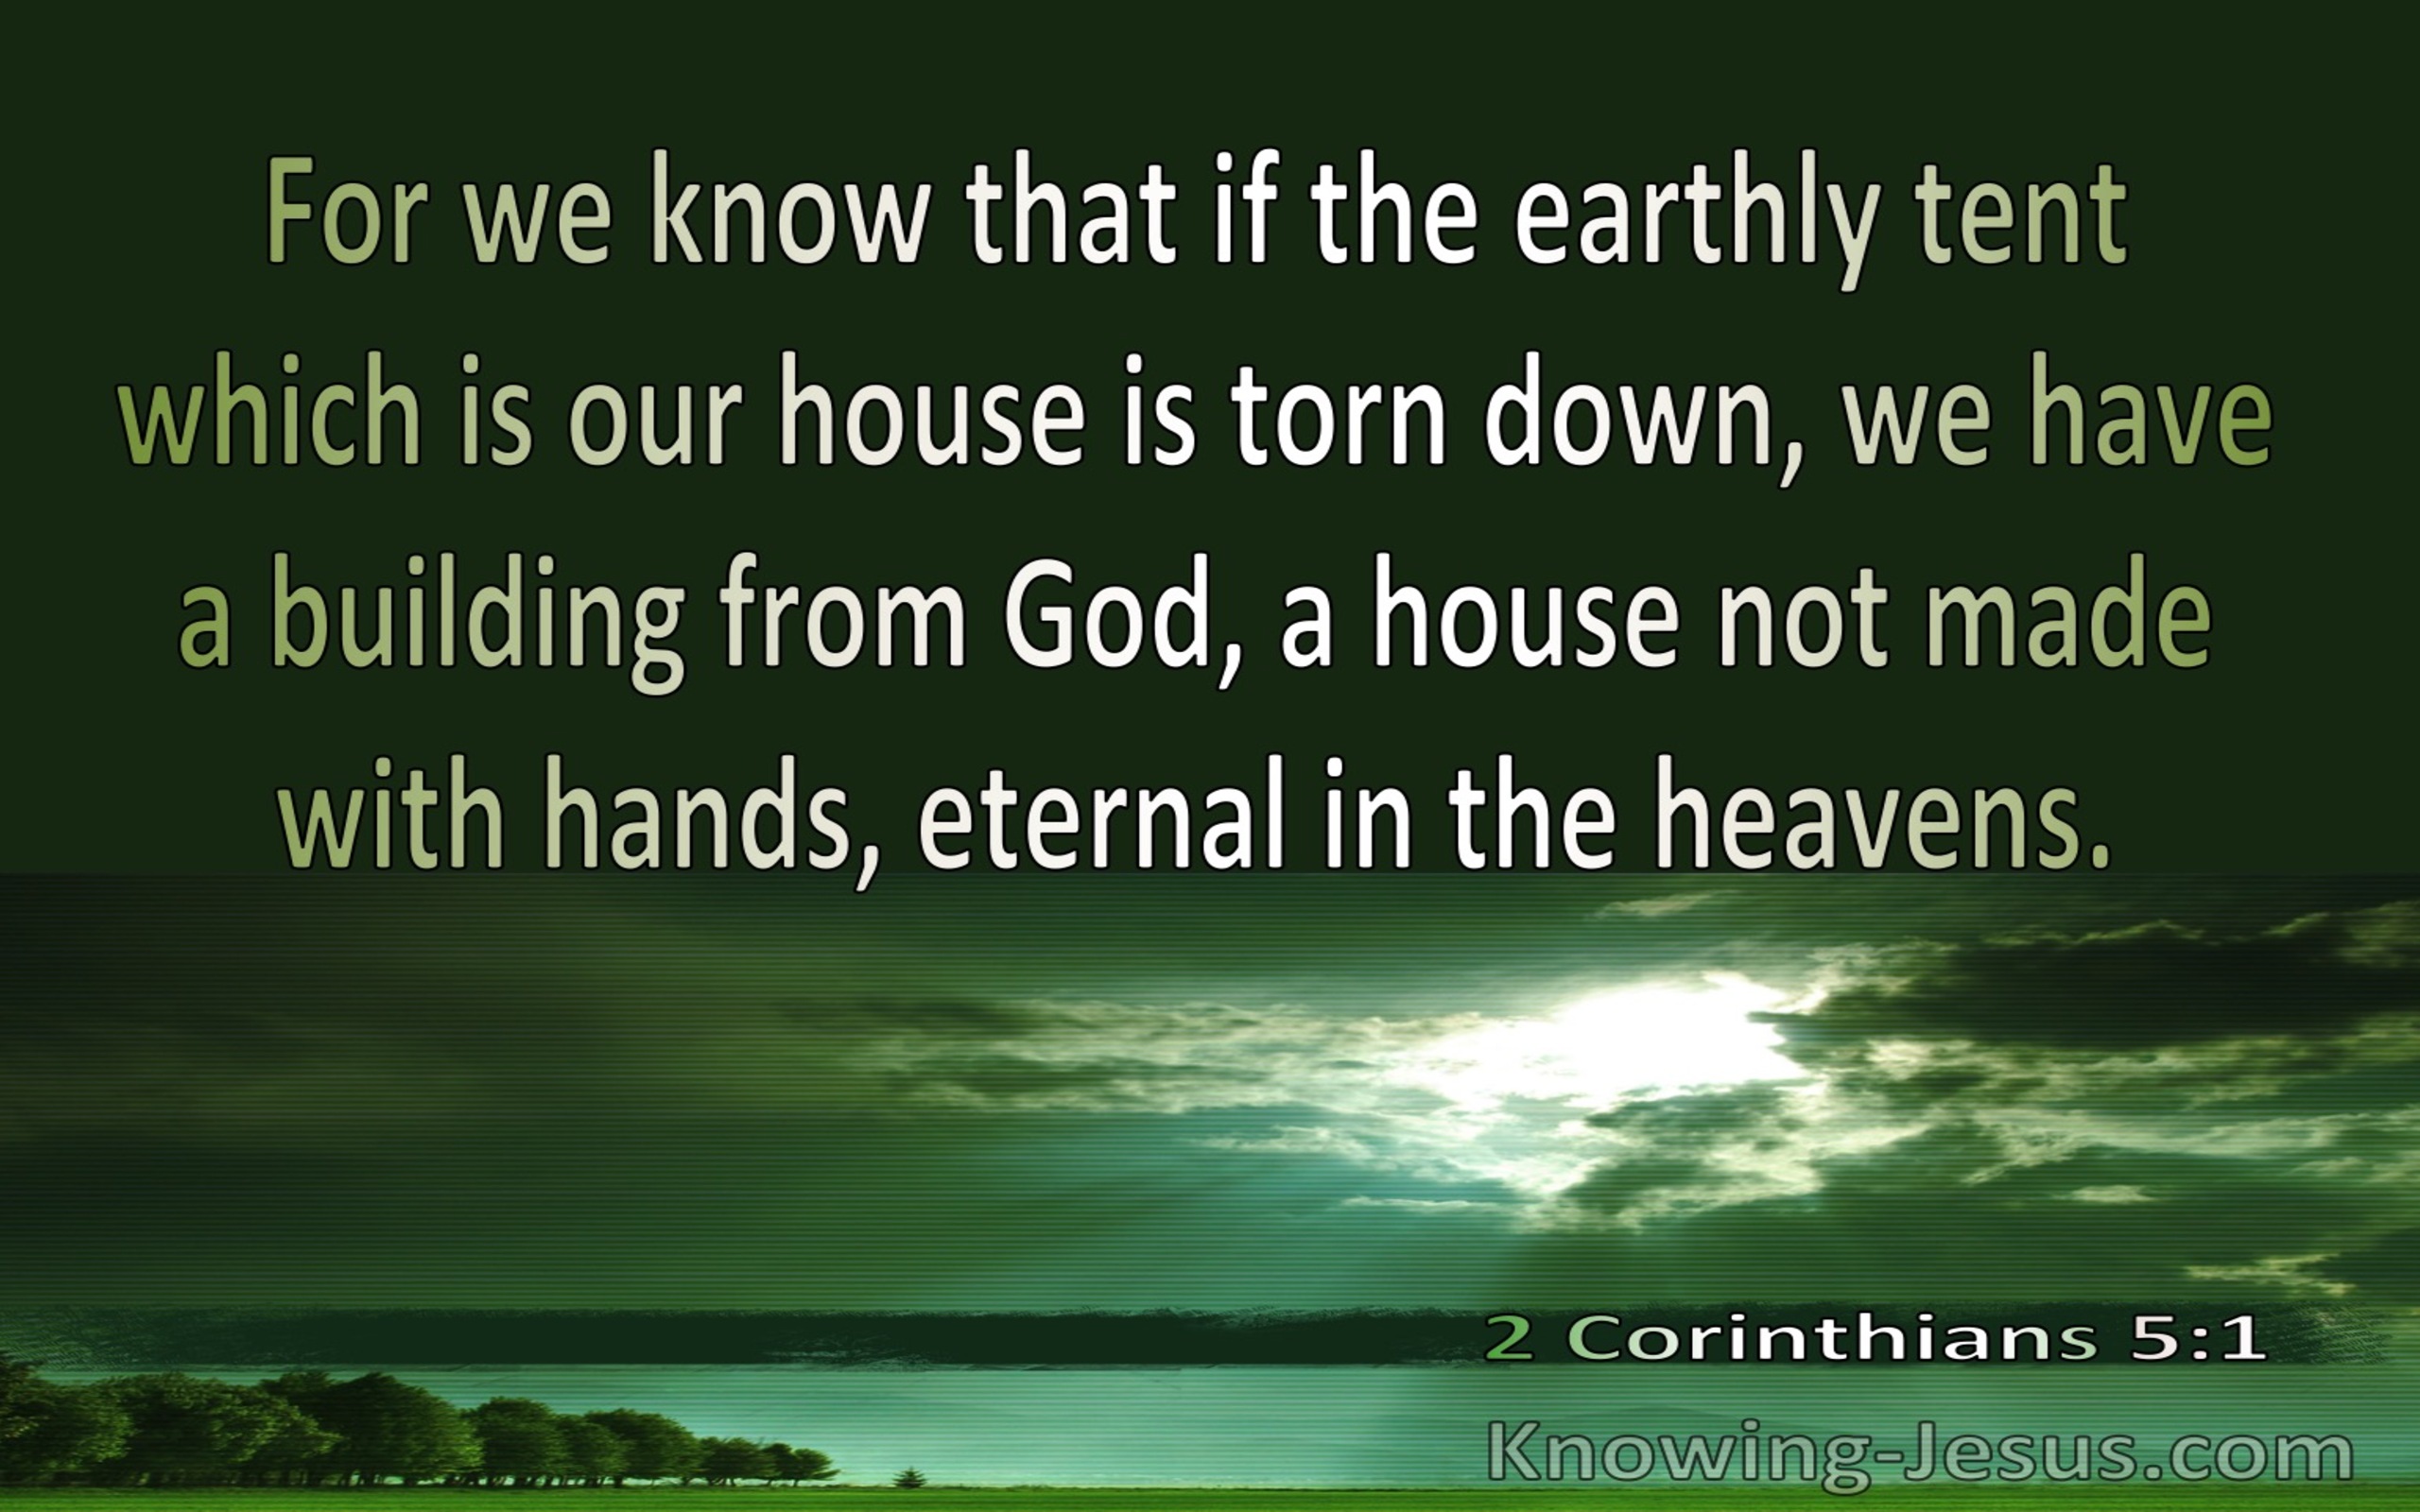 2 Corinthians 5:1 The Earthy  Tent Is Torn Down (green) 